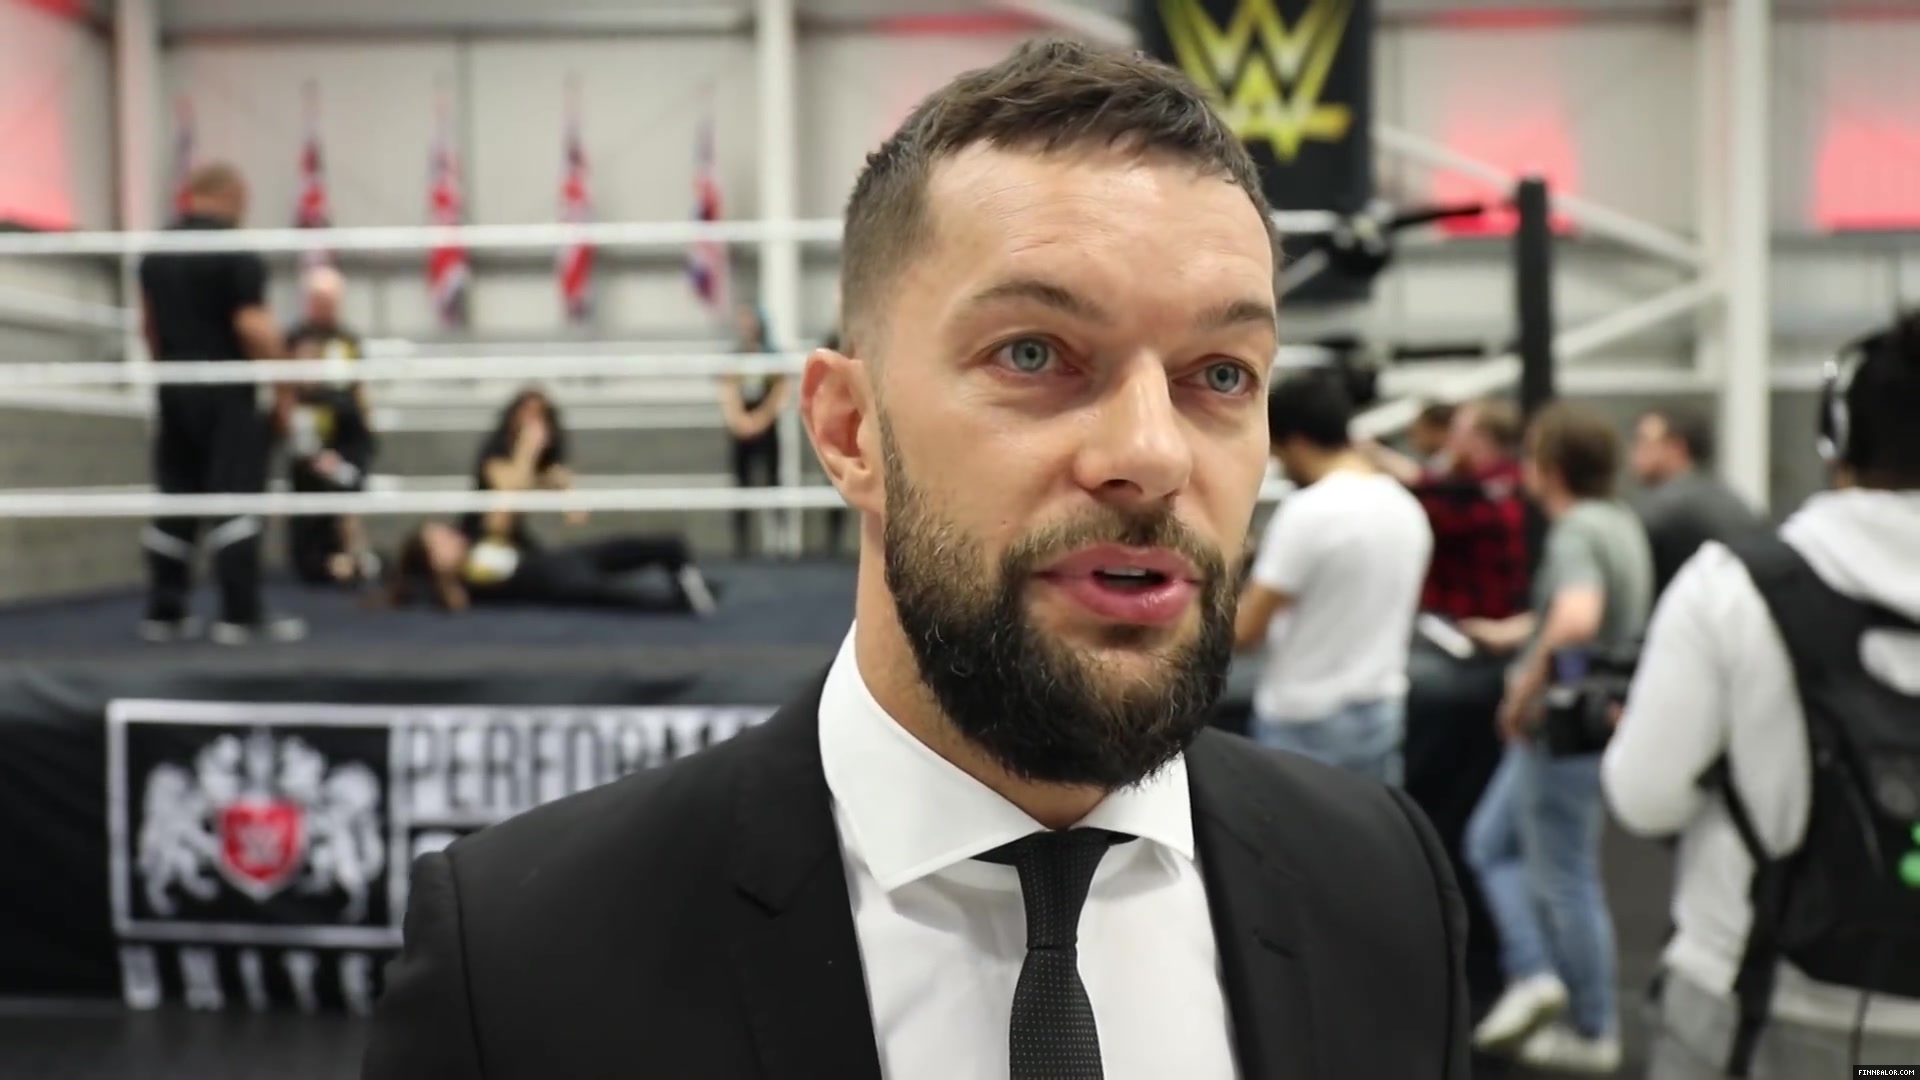 WWE_Superstar_FINN_BALOR_joins_MOUSTACHE_MOUNTAIN_at_the_opening_of_the_NXT_UK_PC_152.jpg